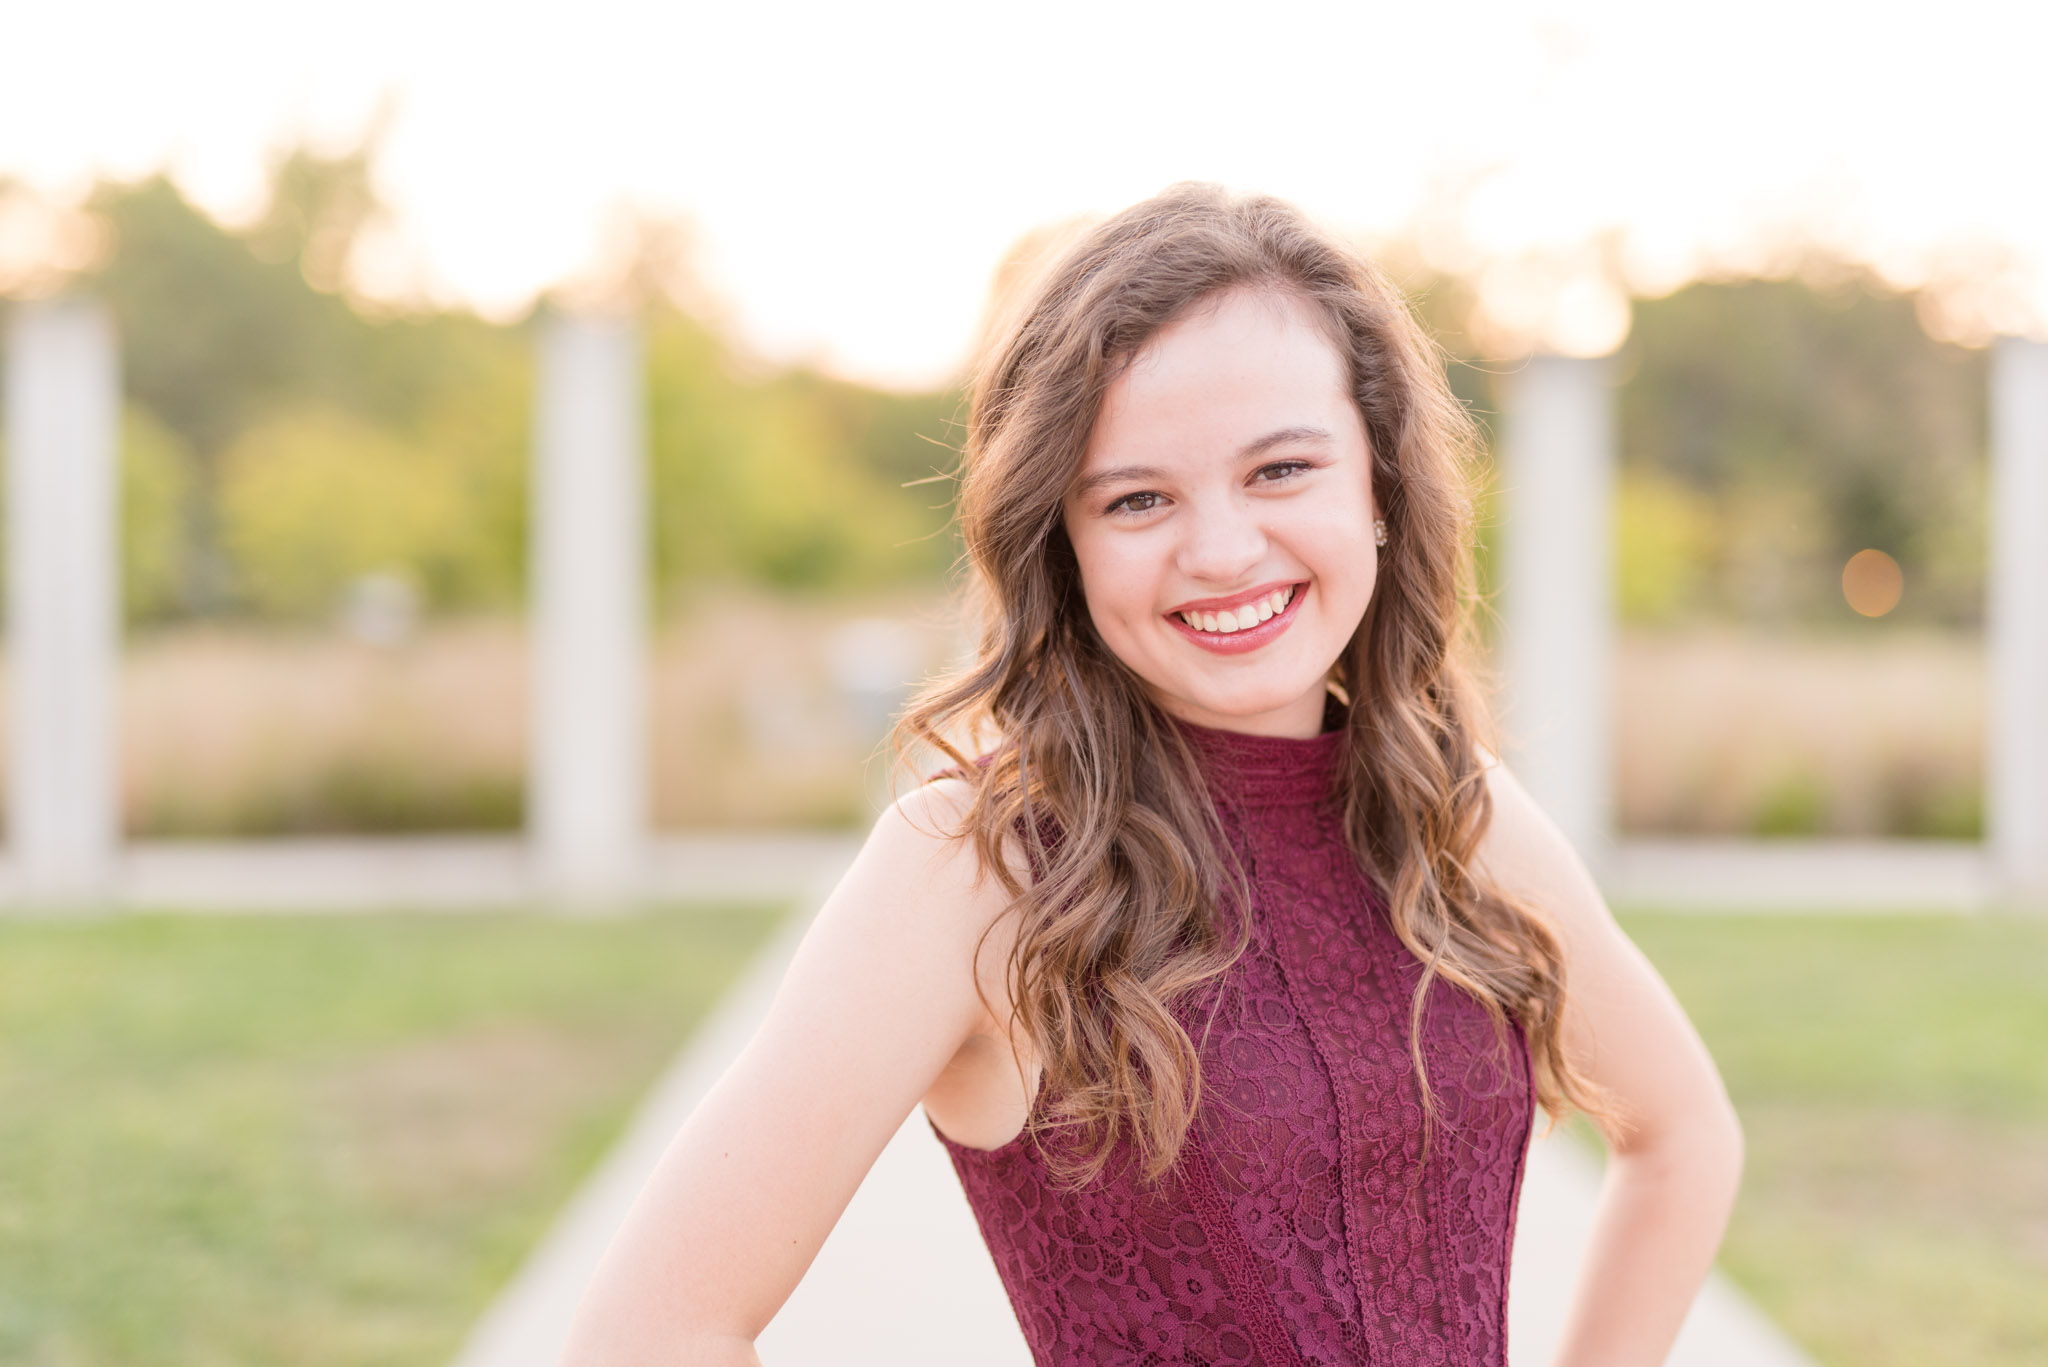 Senior girl smiles at the camera with hands on hips.